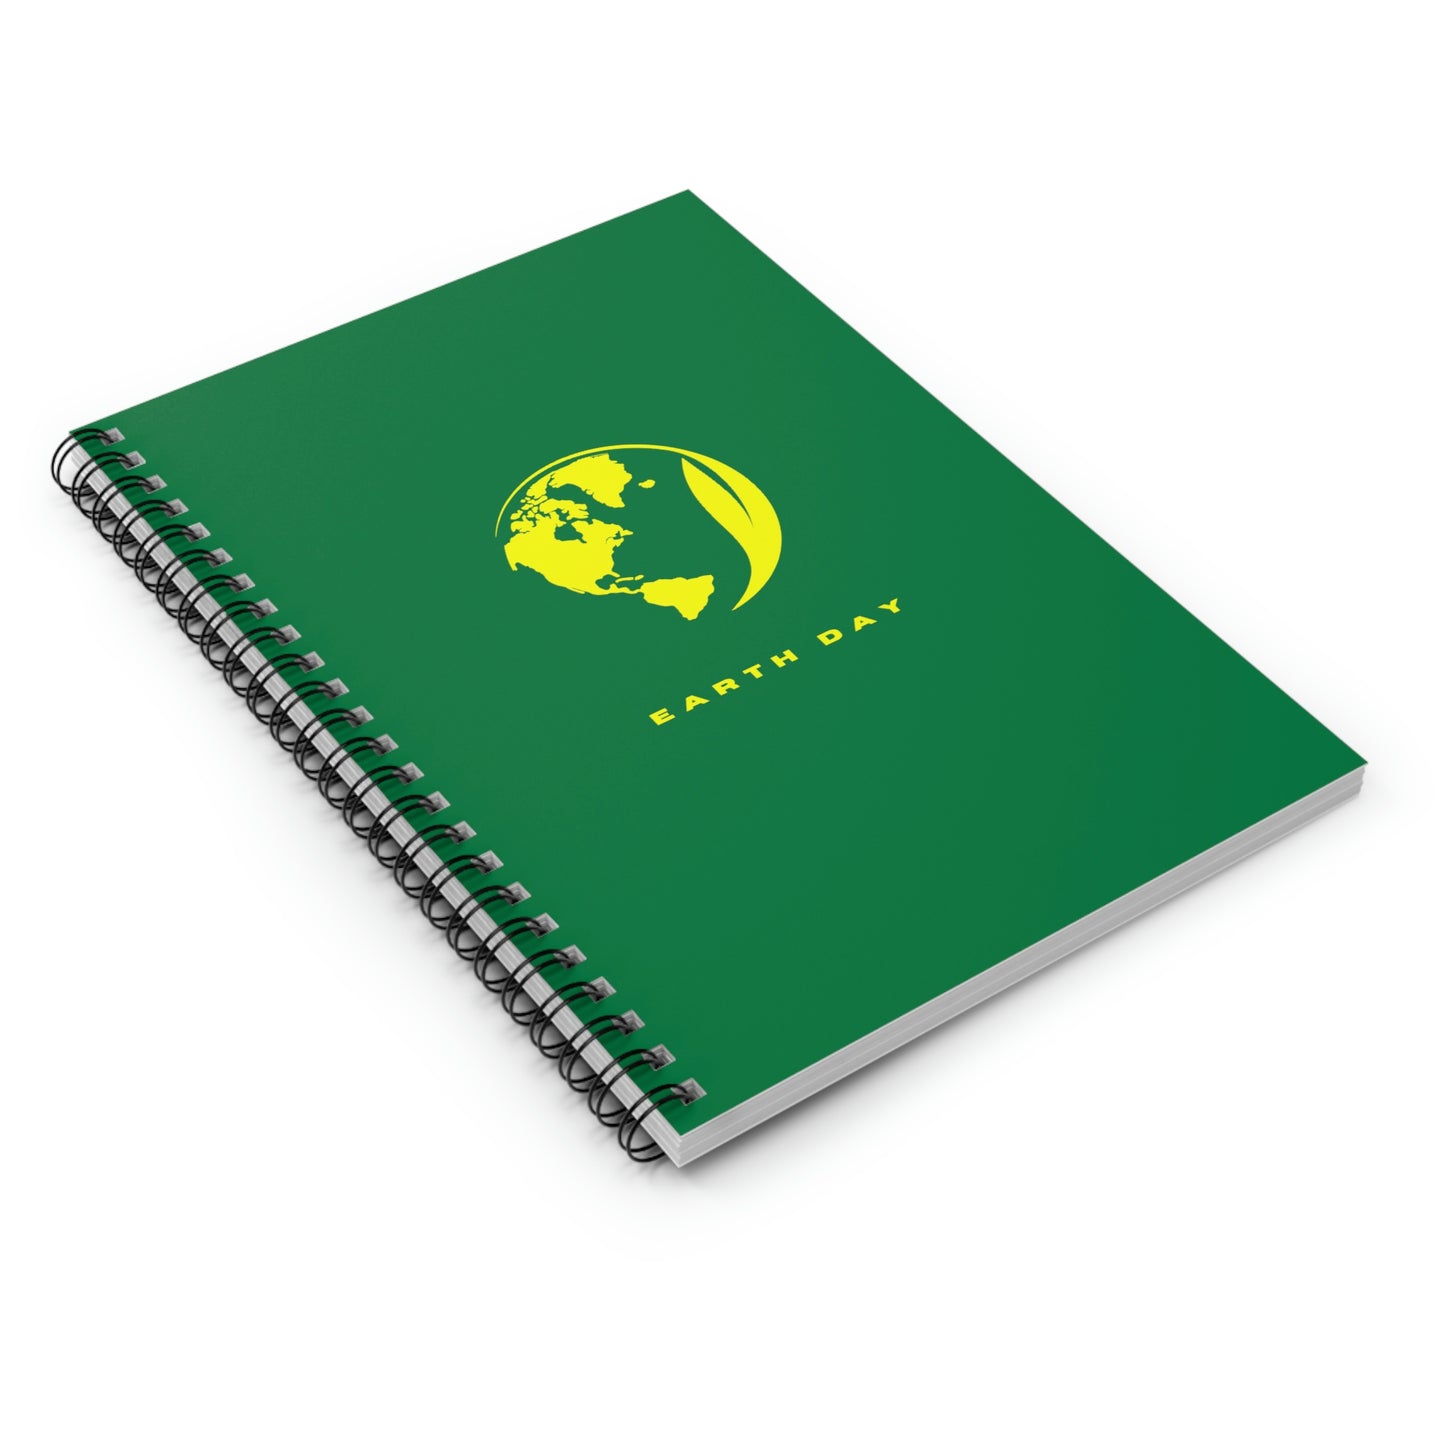 EARTH DAY - Spiral Notebook - Ruled Line - Green Cover